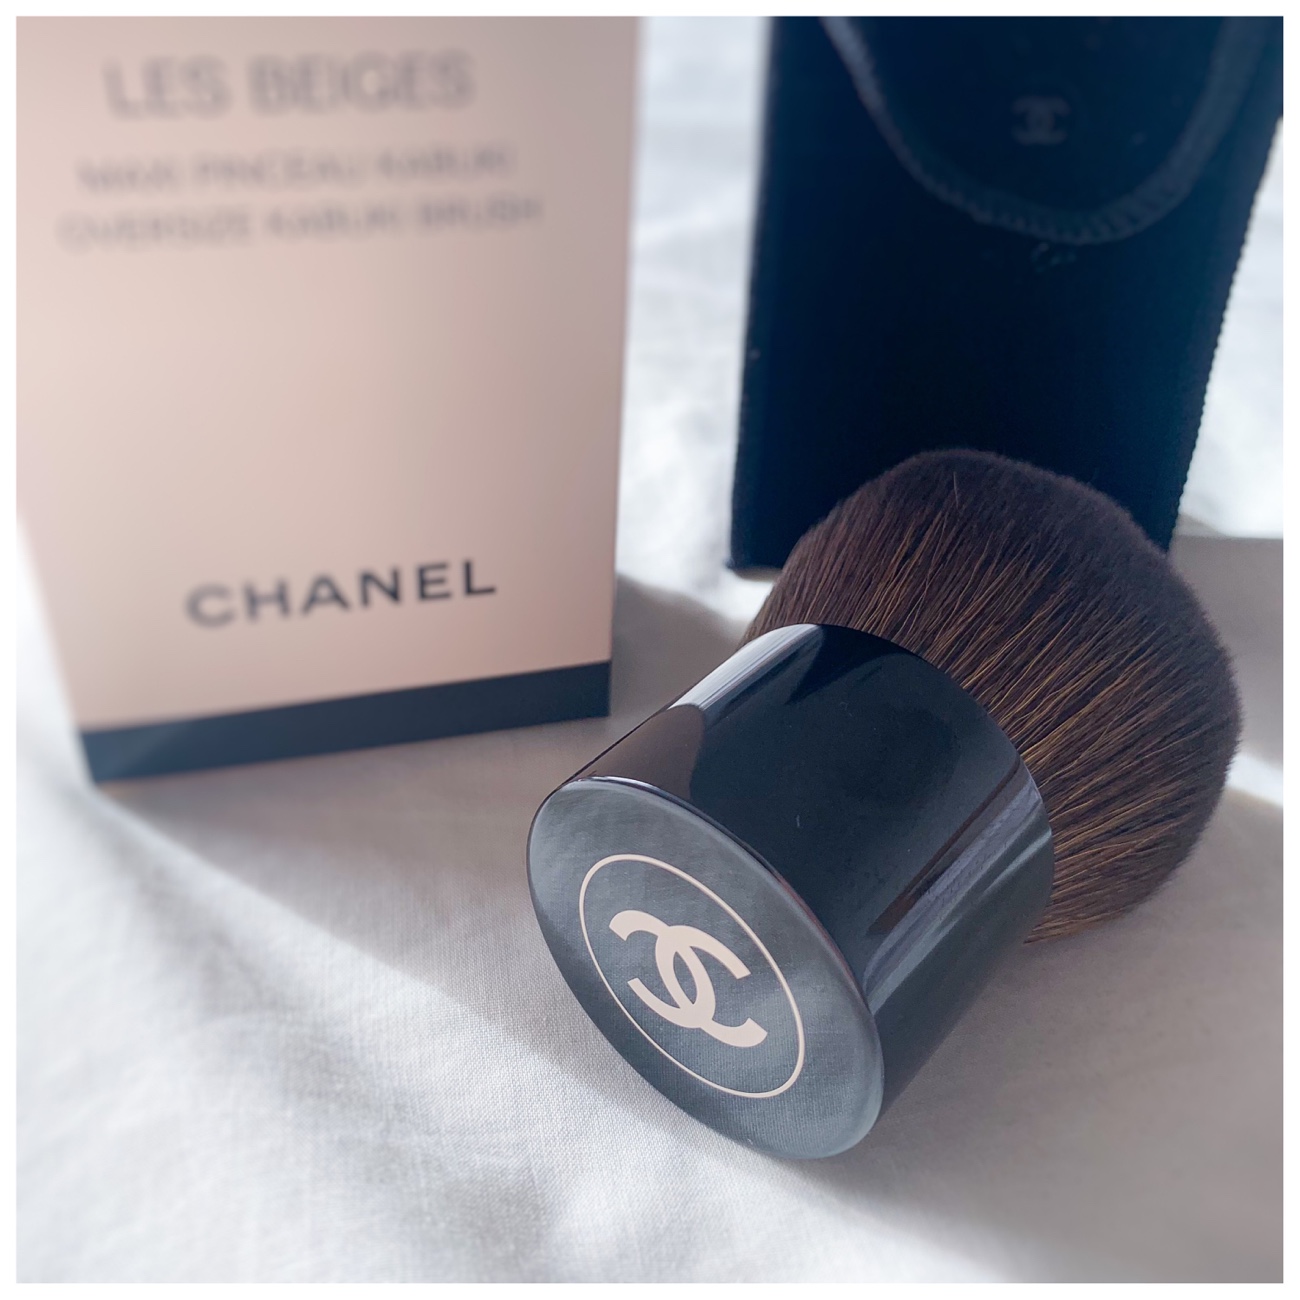 Chanel Les Beiges 2022 Summer Collection